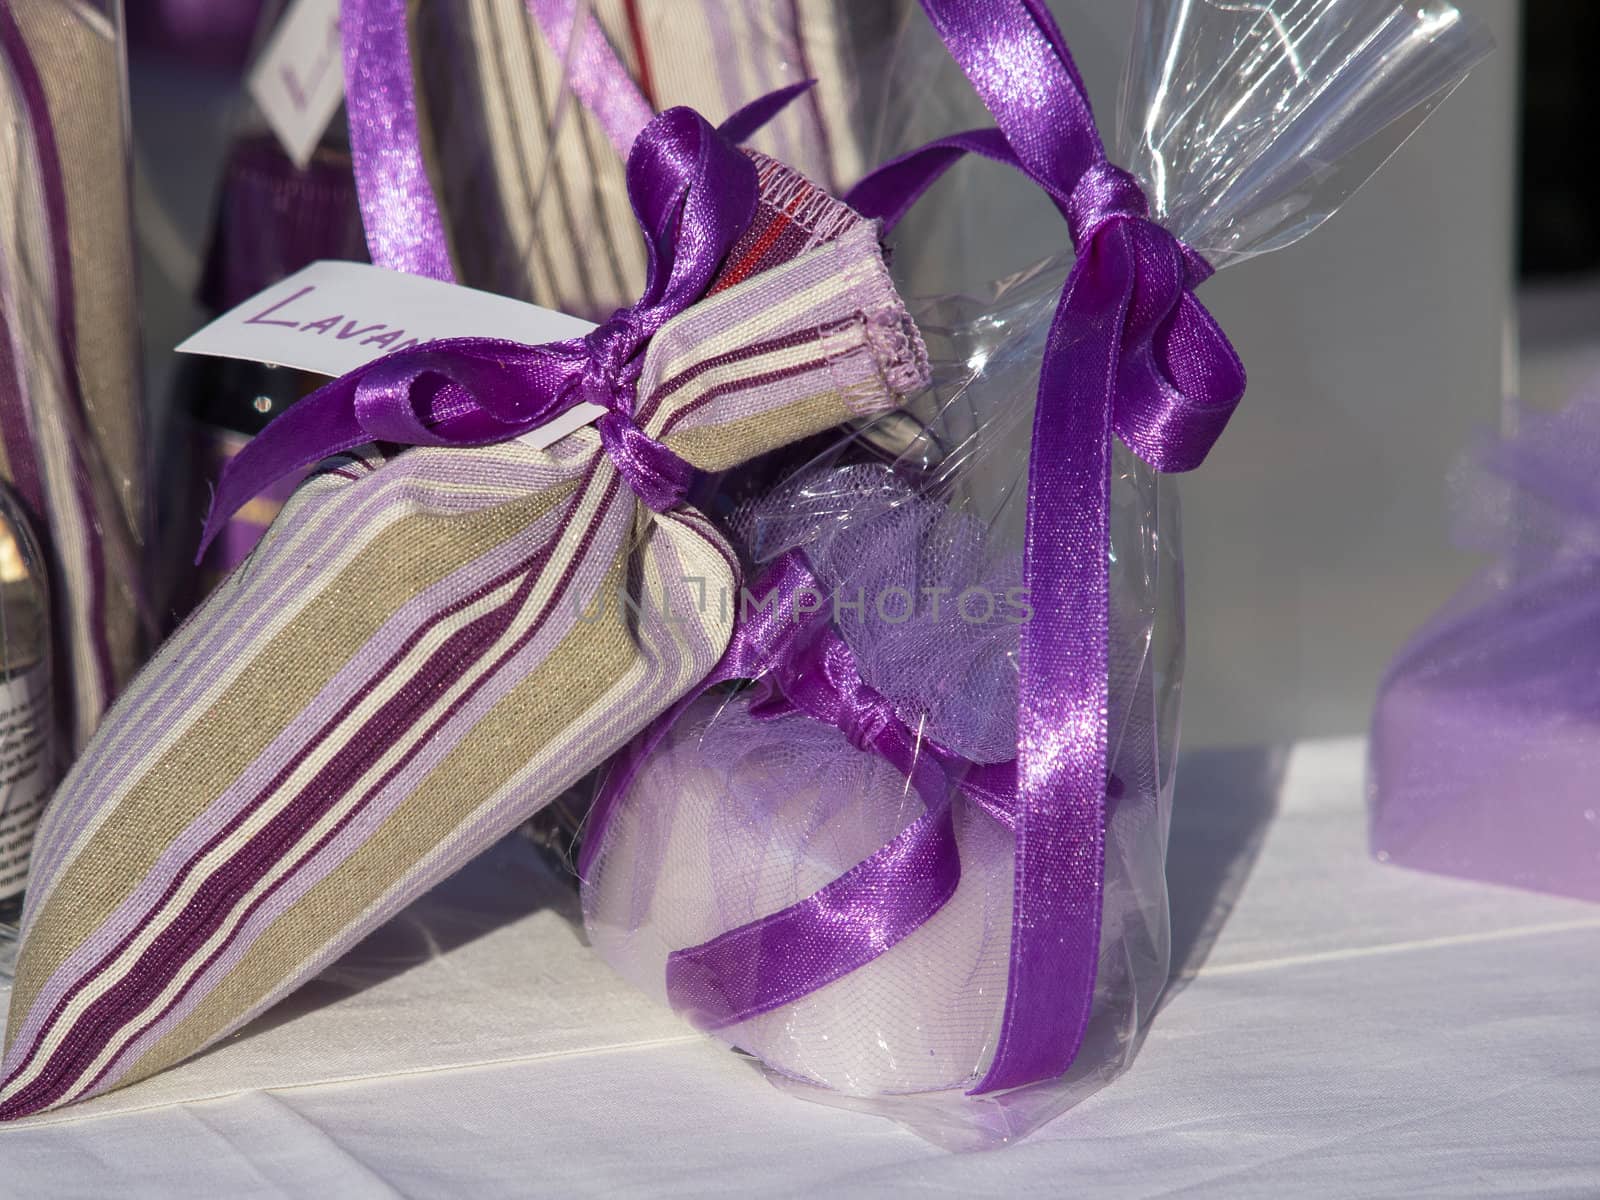 lavender soap and bag with lavender flowers